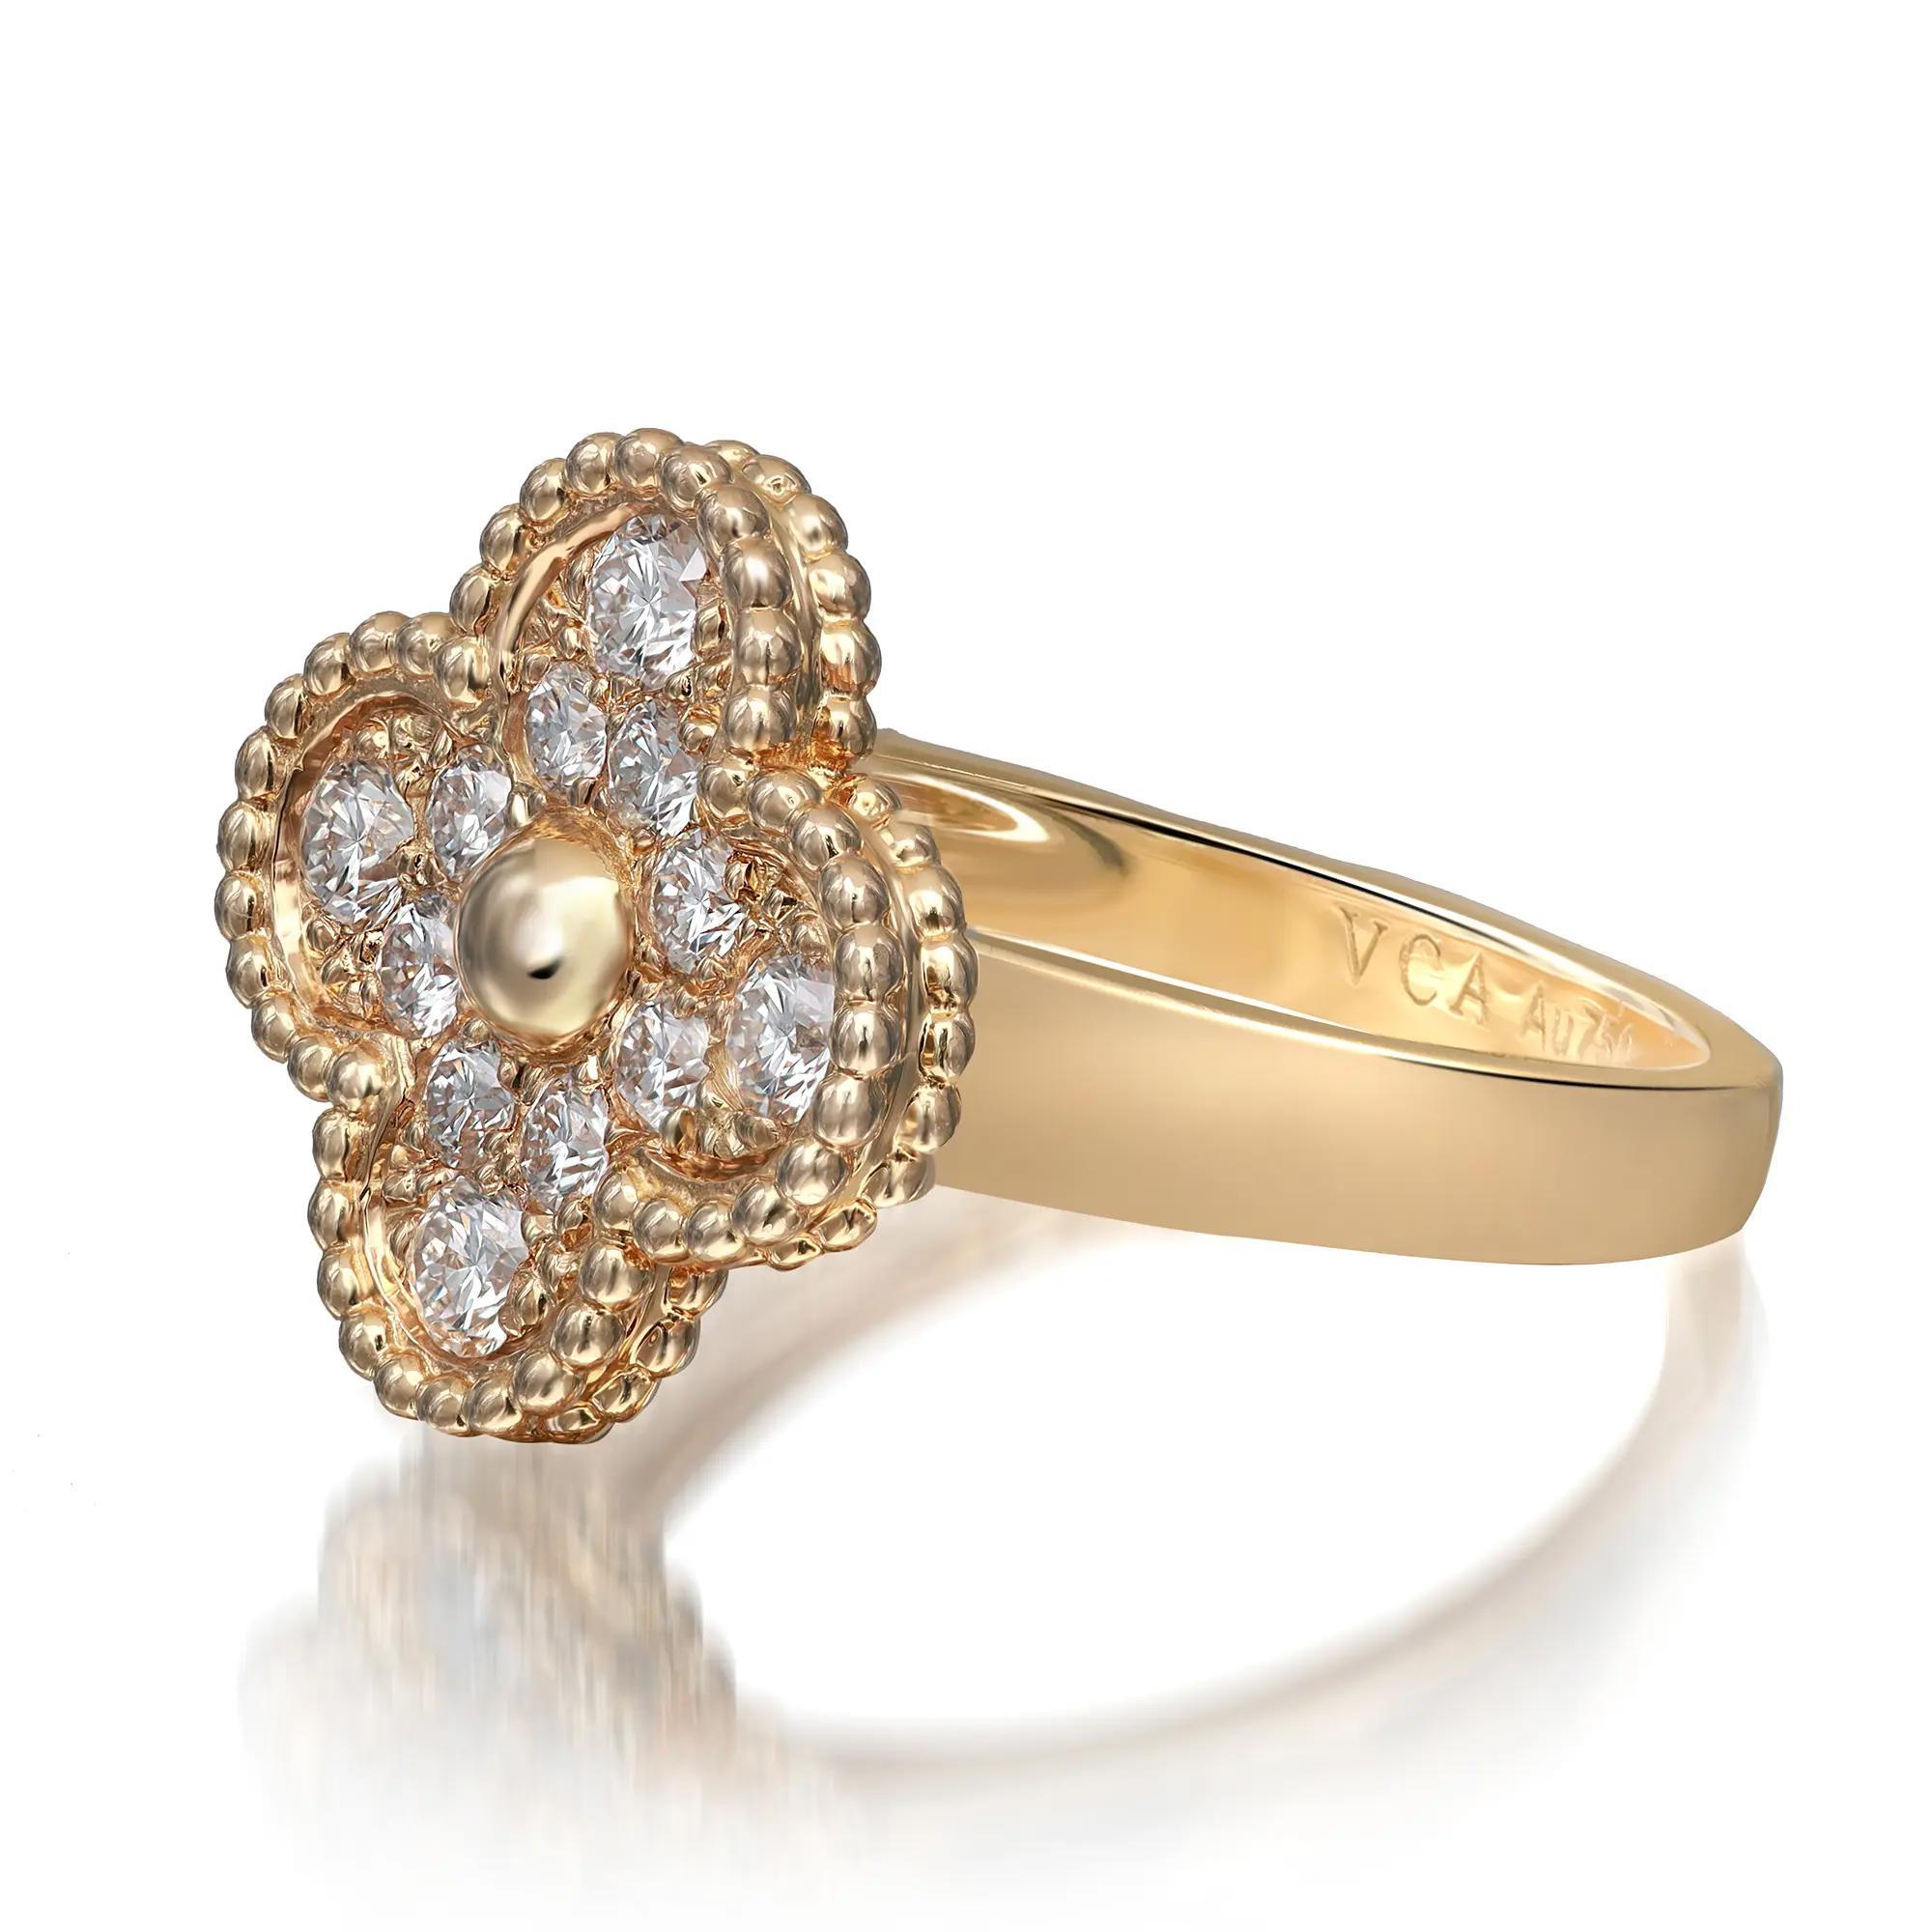 Van Cleef & Arpels Vintage Alhambra diamond ring. Inspired by the clover leaf, this ring showcases 12 round brilliant cut diamonds weighing 0.48 carat. Diamond quality: DEF color and IF to VVS clarity. Ring size: 52 US 6. Total weight: 6.40 grams.